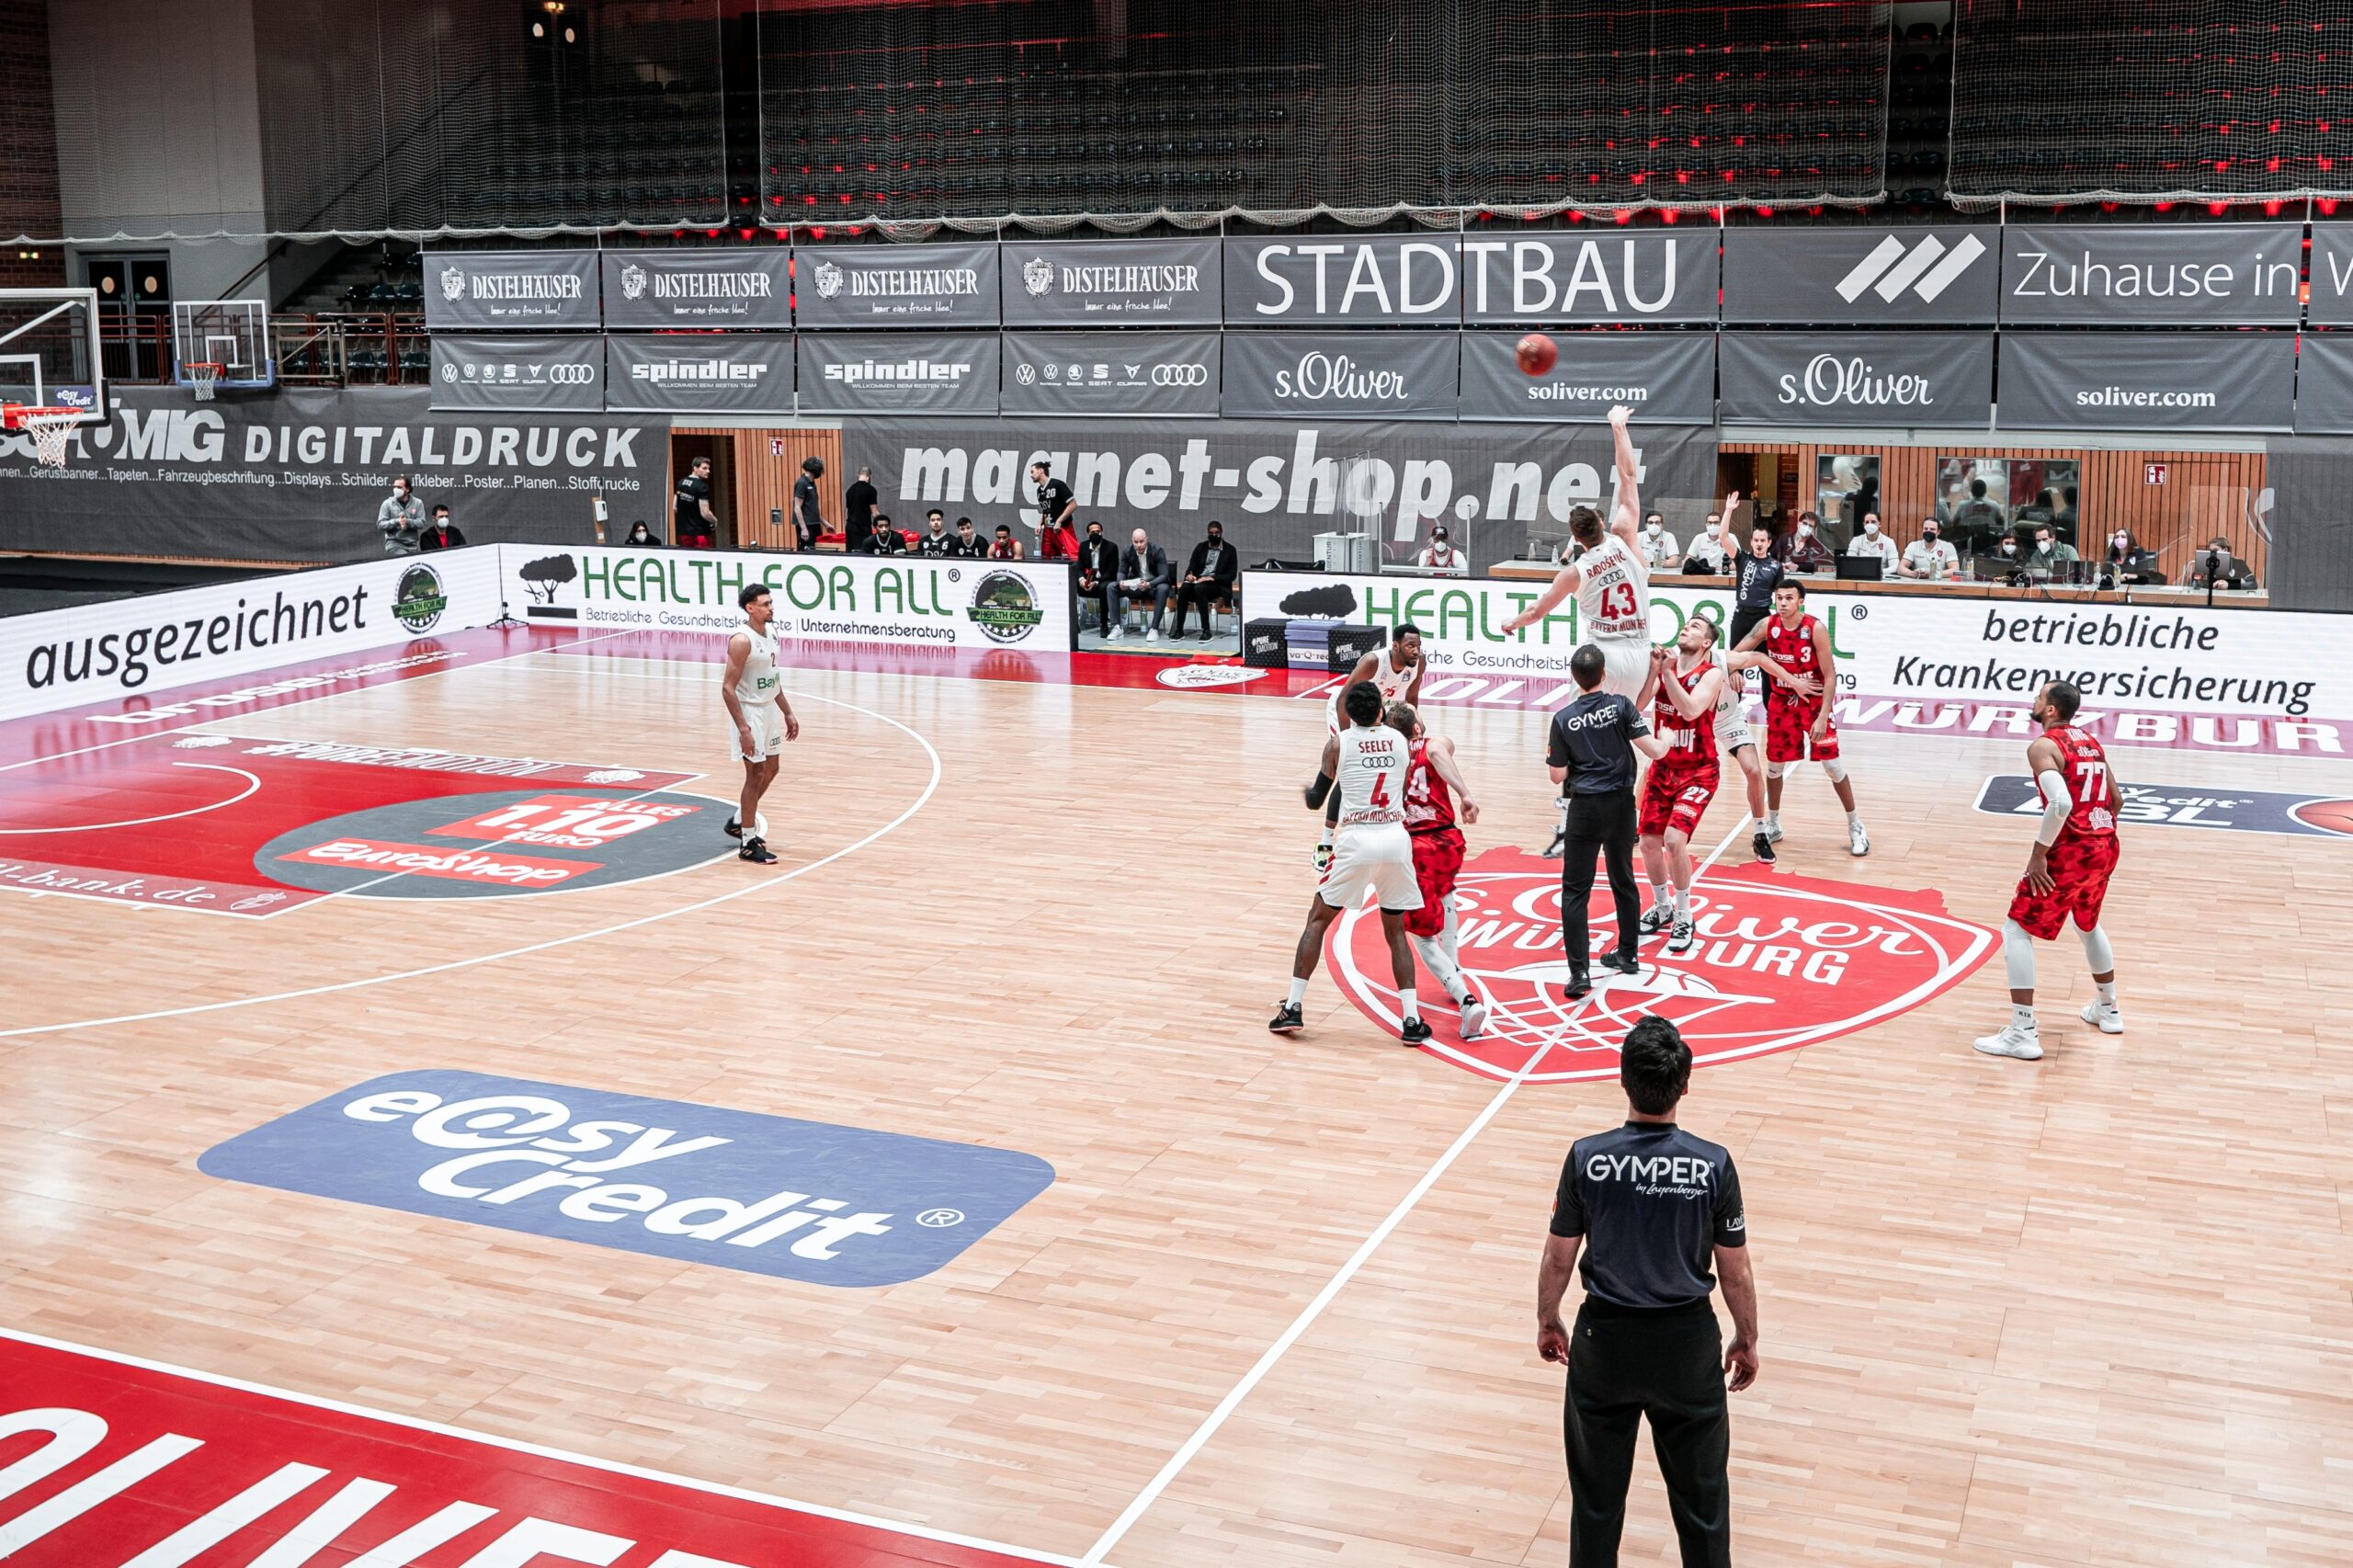 sOW Basketball Bandenwerbung HEALTH FOR ALL